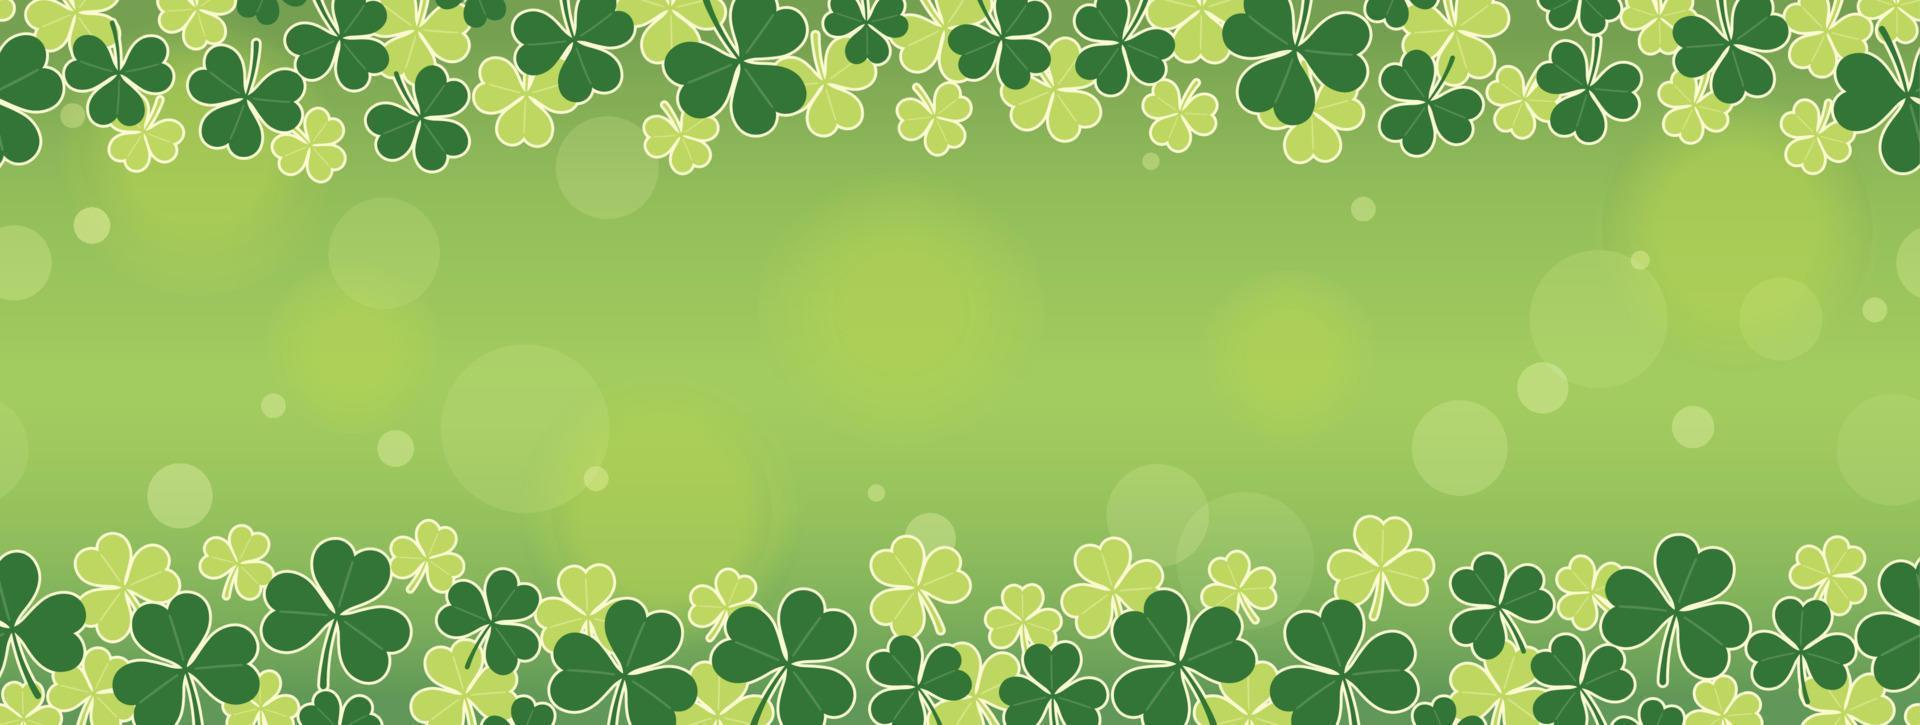 Vector Clover Seamless Background Illustration For St. Patricks Day With A Green Background And Text Space. Horizontally Repeatable.